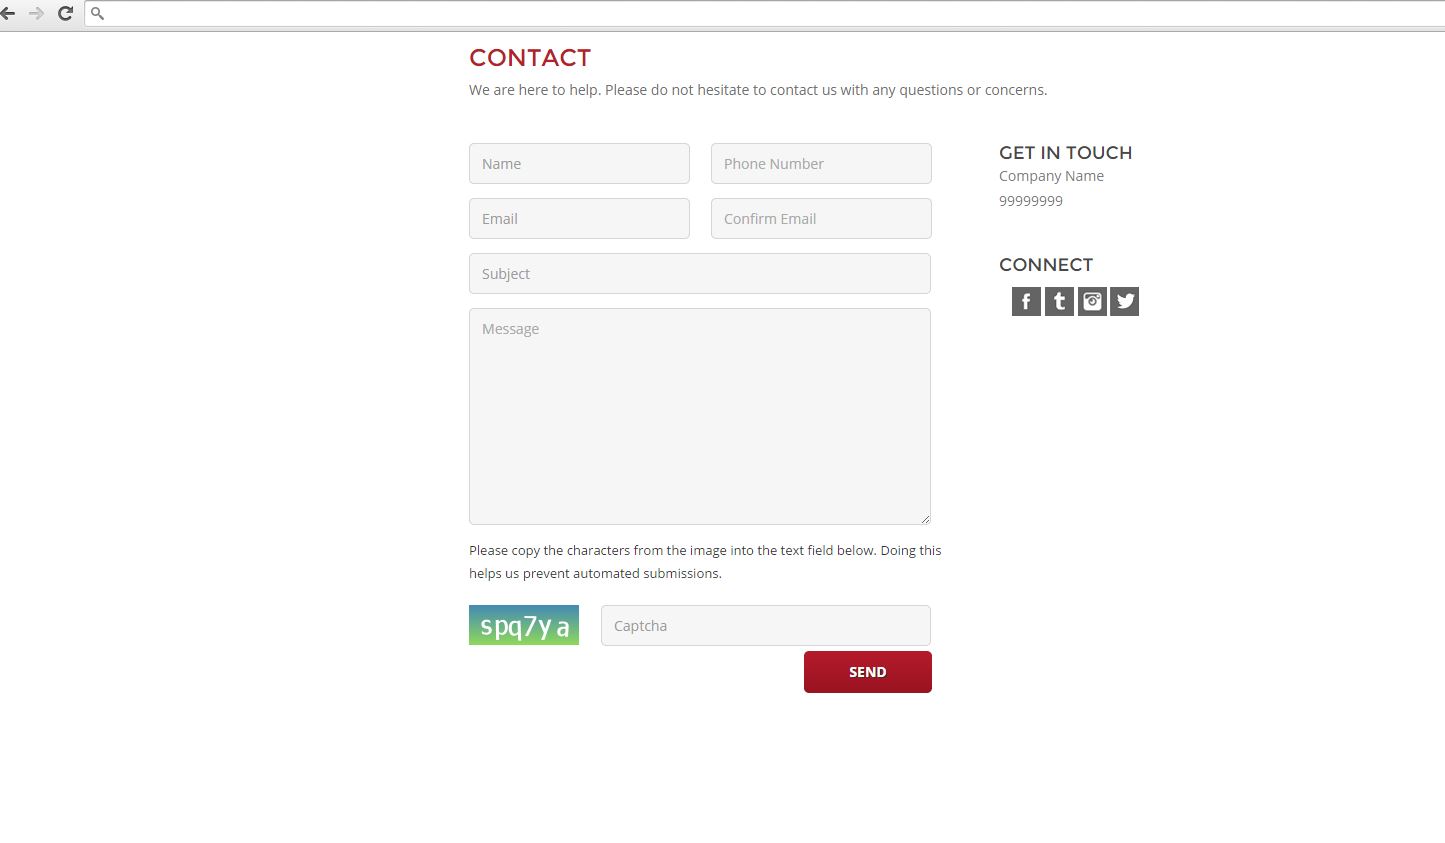 Confirm Email field in Contact form BigCommerce